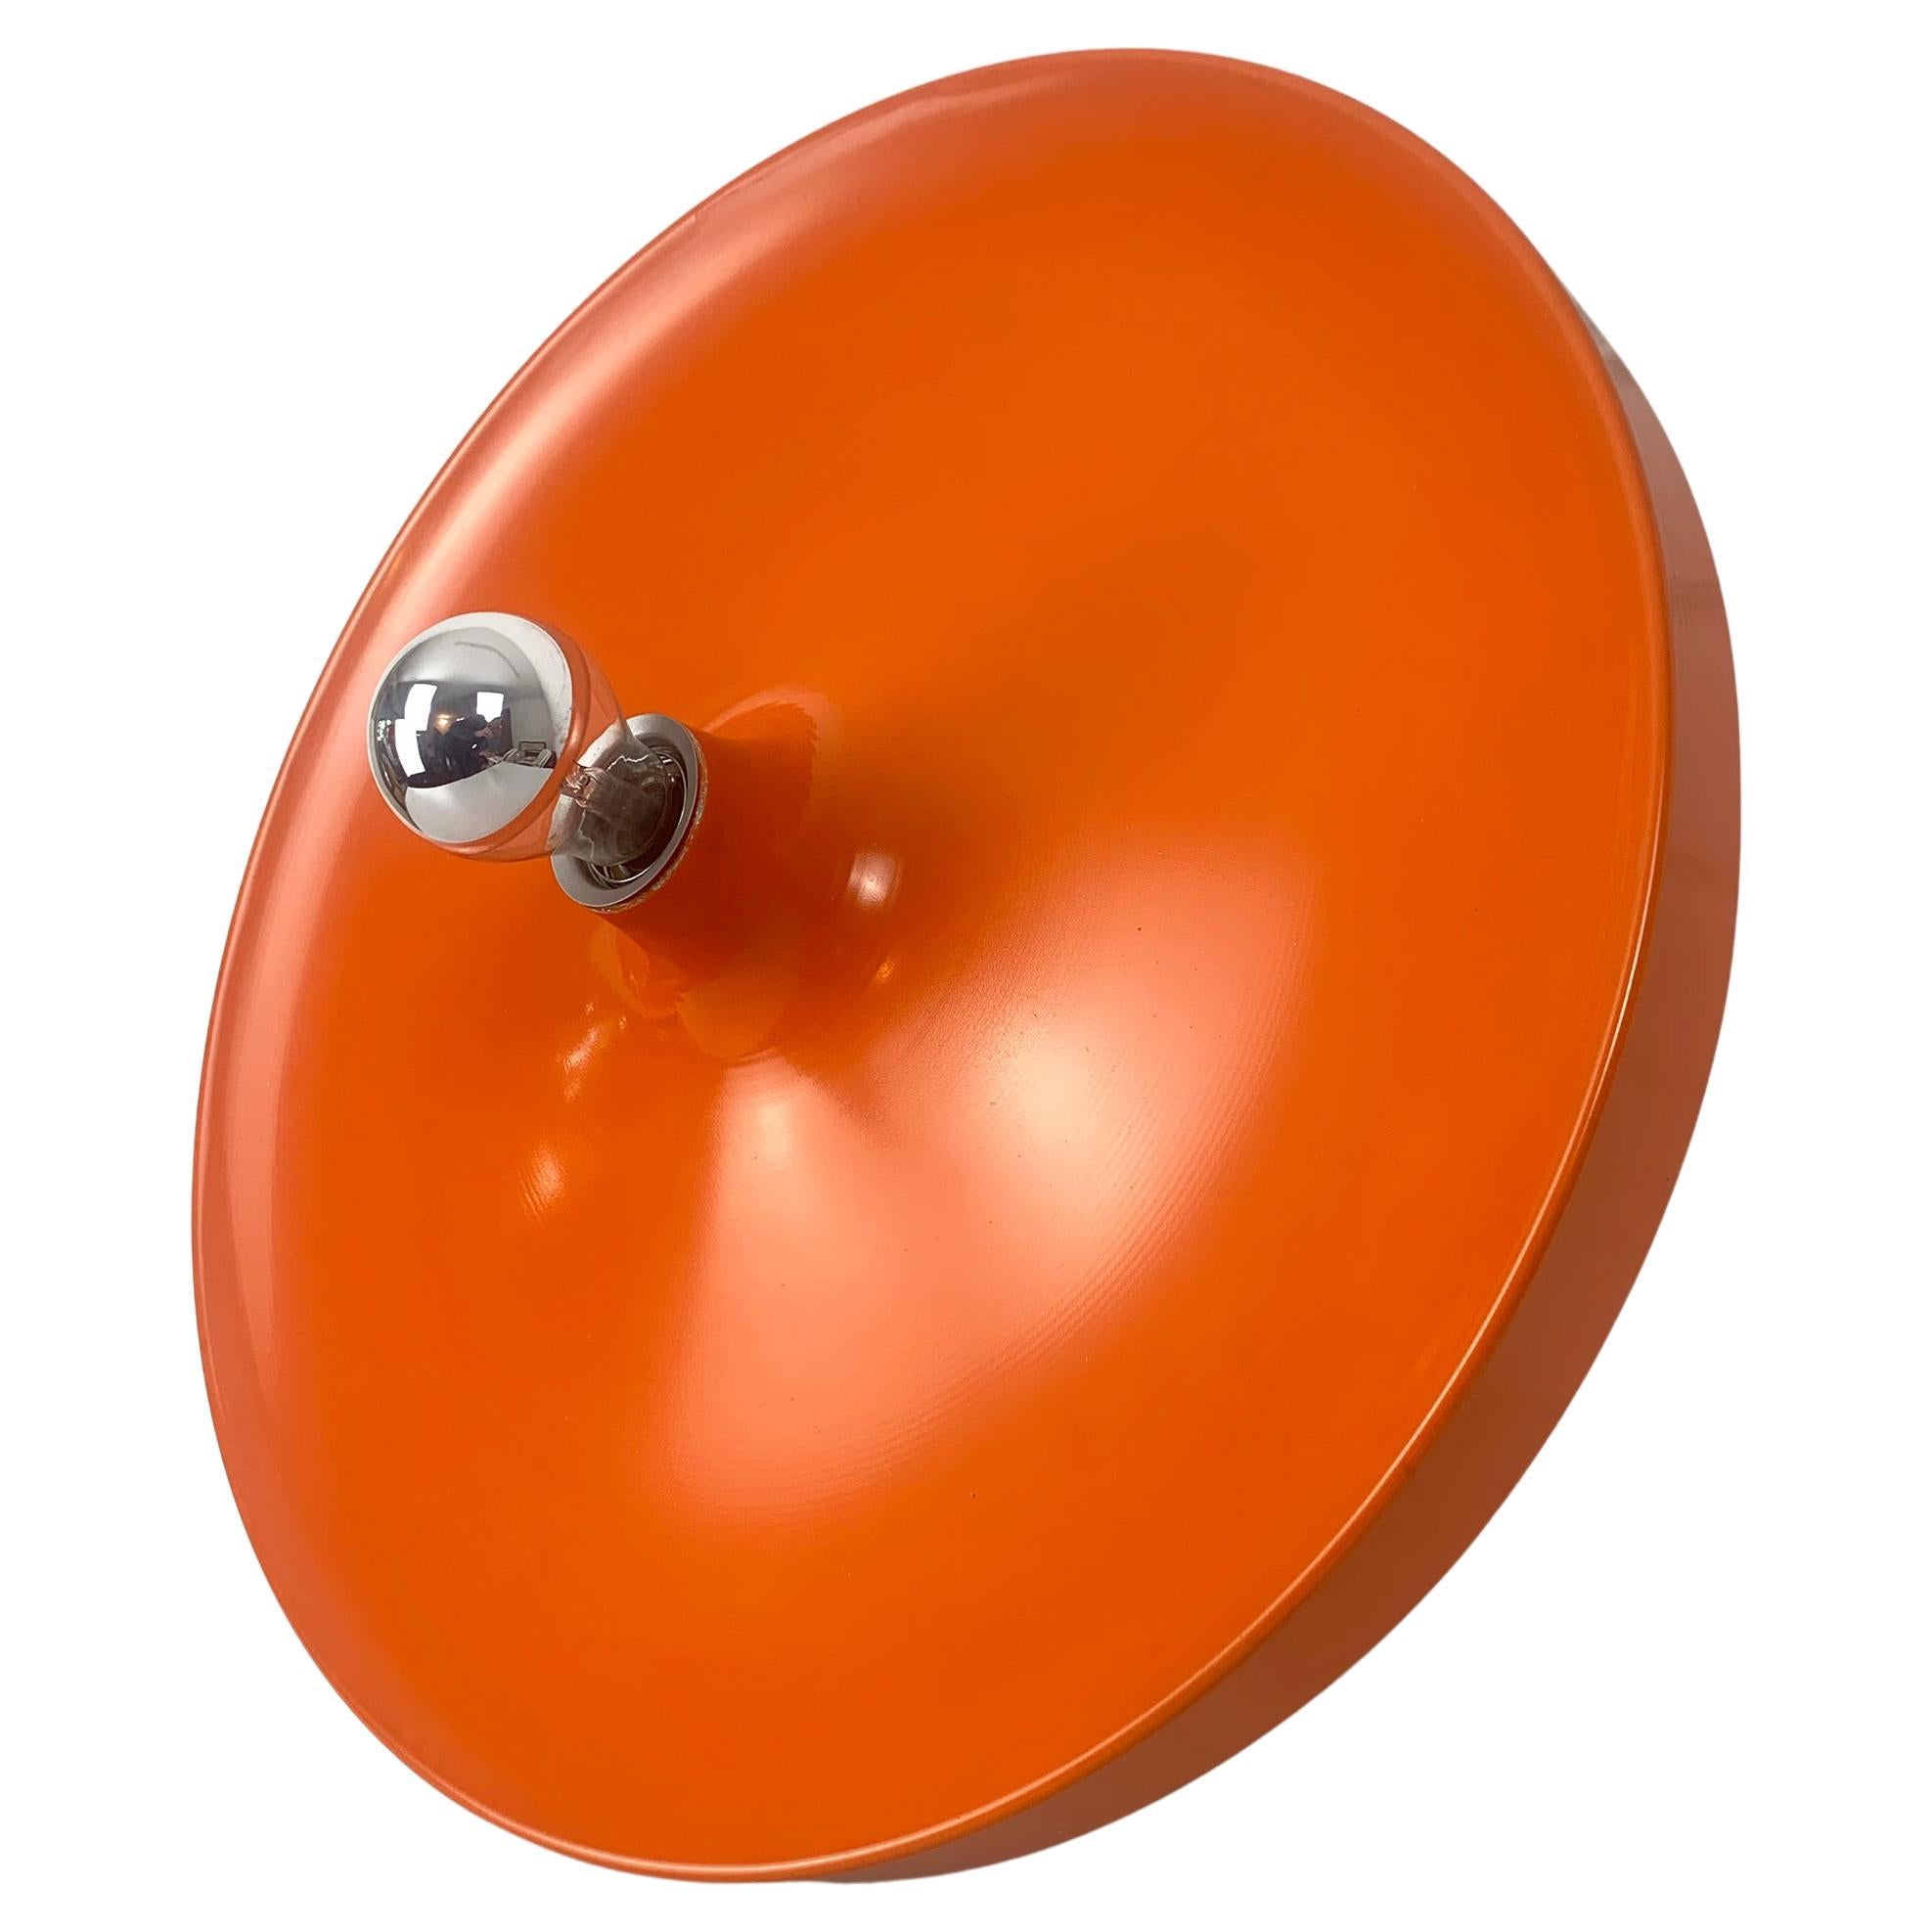 Large Charlotte Perriand Space Age Flush Sconce Disc Wall Light, Germany, 1960s For Sale